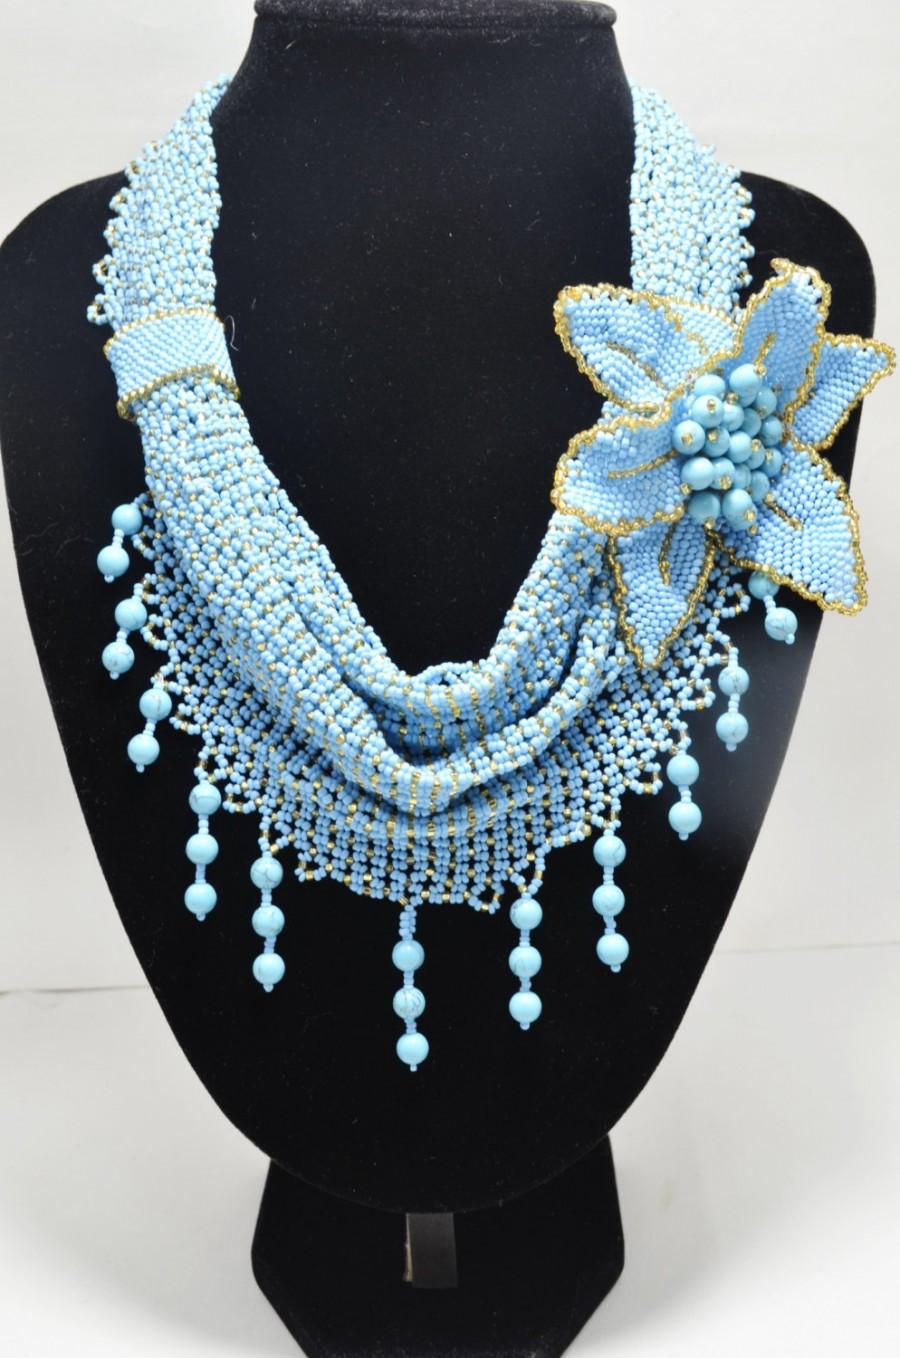 Wedding - Turquoise Statement Beaded Scarf Necklace with Flower Brooch, Beading Holiday Necklace, Fashion Seed Bead Jewelry, Christmas Gift for Her